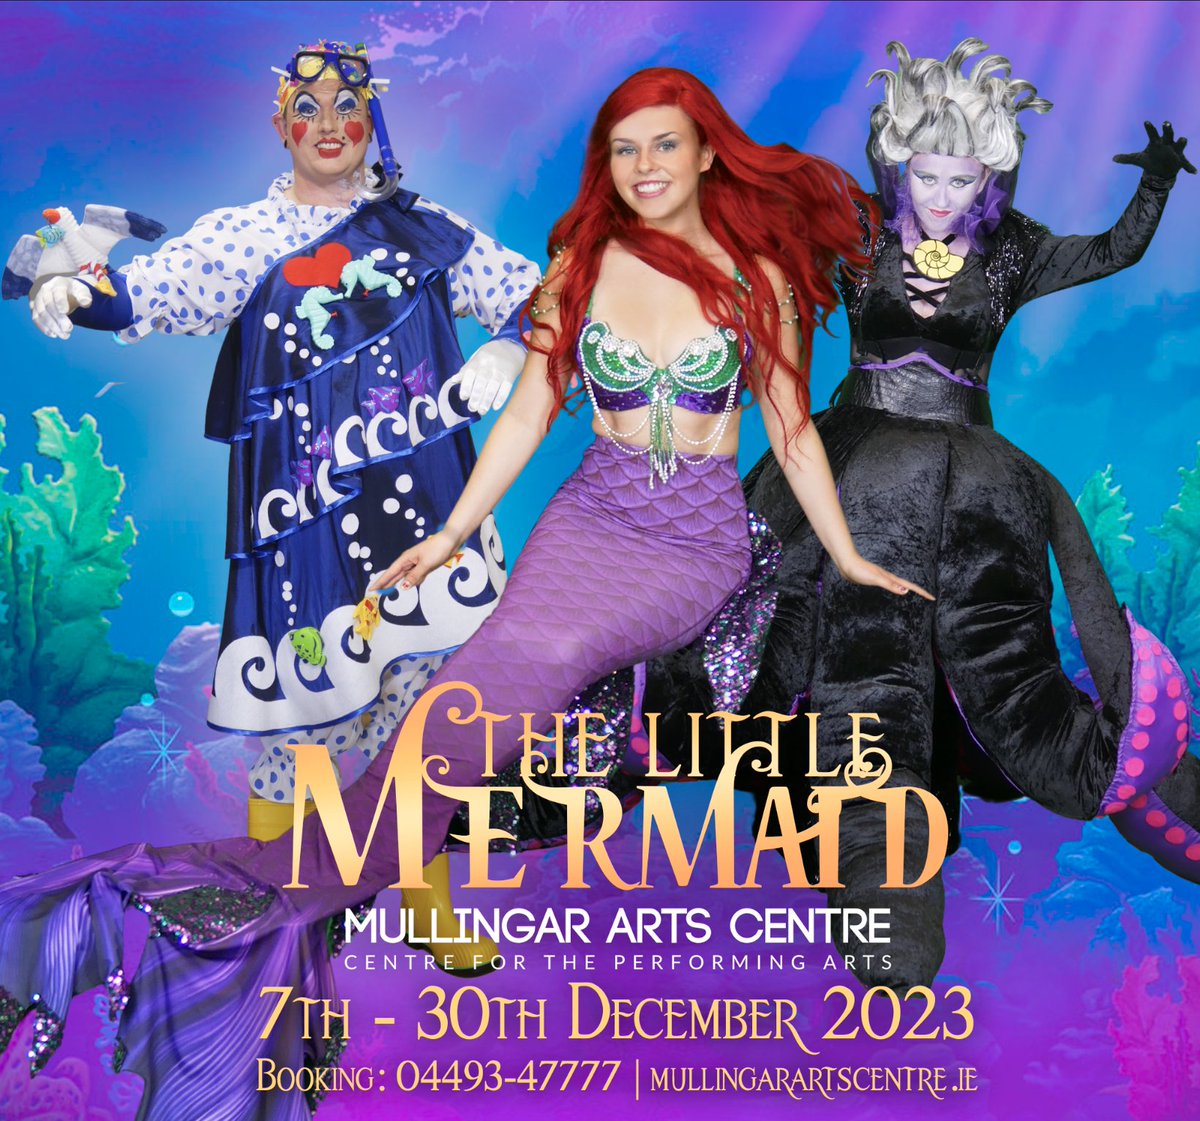 Week 2 of this years Pantomime The Little Mermaid is starting tomorrow night Wednesday 13th at 7pm. Do you have your tickets yet?? If not BOOK NOW to join us under the Sea 🧜‍♀️🎄🌊🐠 Tickets: €20/€16 Booking & Info: mullingarartscentre.ie/index.php/revi… | 044 934 7777